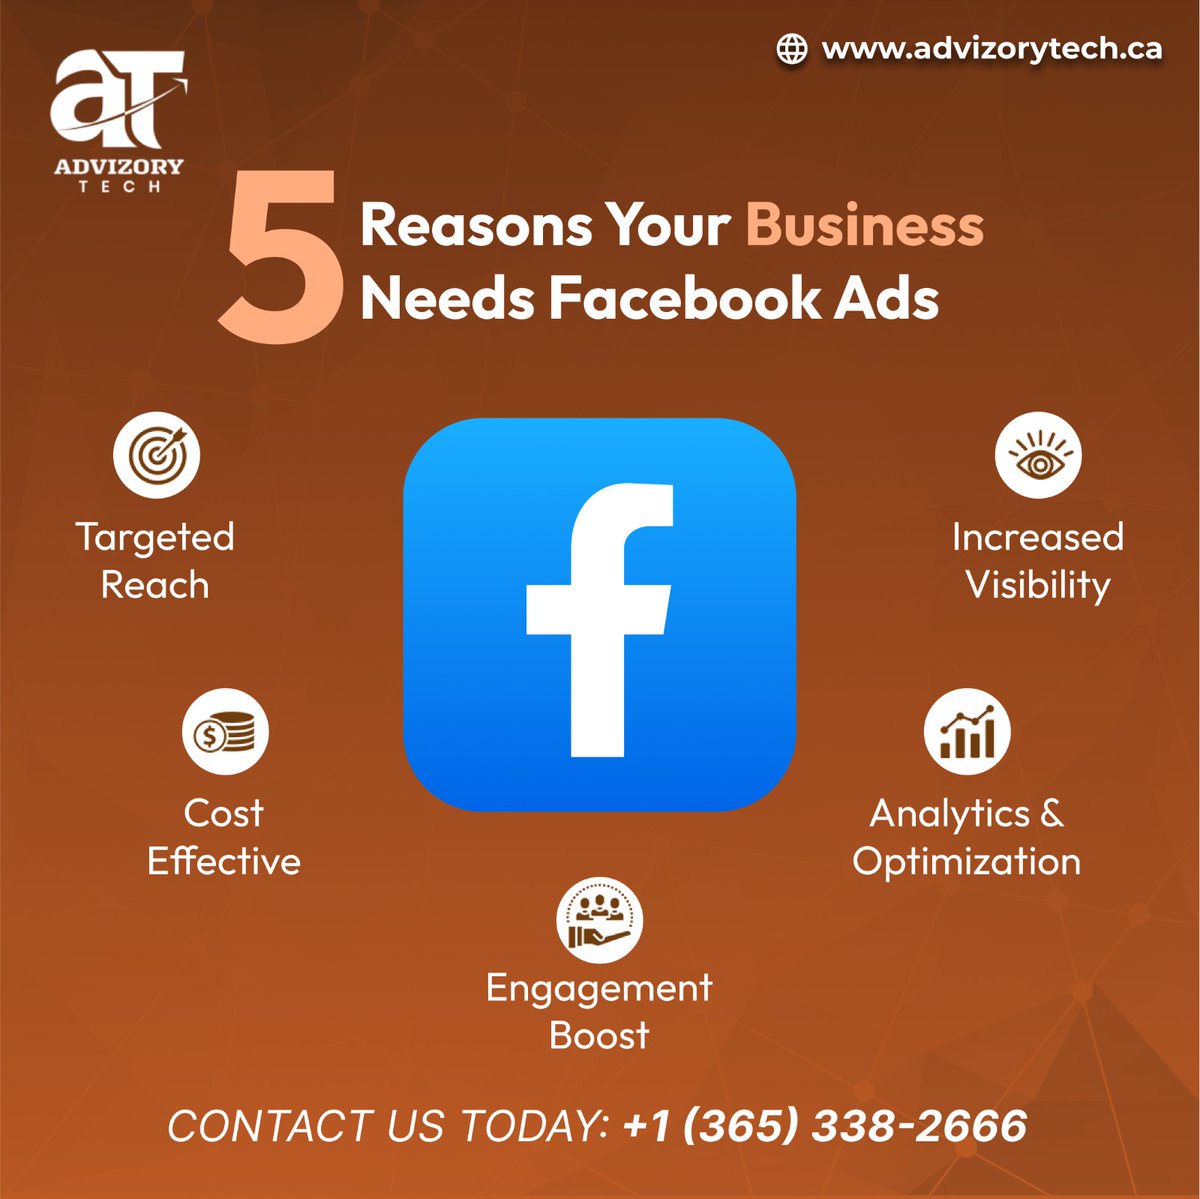 🚀 Power up your business! Discover the top 5 reasons why Facebook Ads are a game-changer for your growth. 📈

Visit our website now!
advizorytech.ca

#FacebookAds #DigitalMarketing #BusinessGrowth #MarketingTips #SocialMediaStrategy #AdCampaign #OnlineMarketing